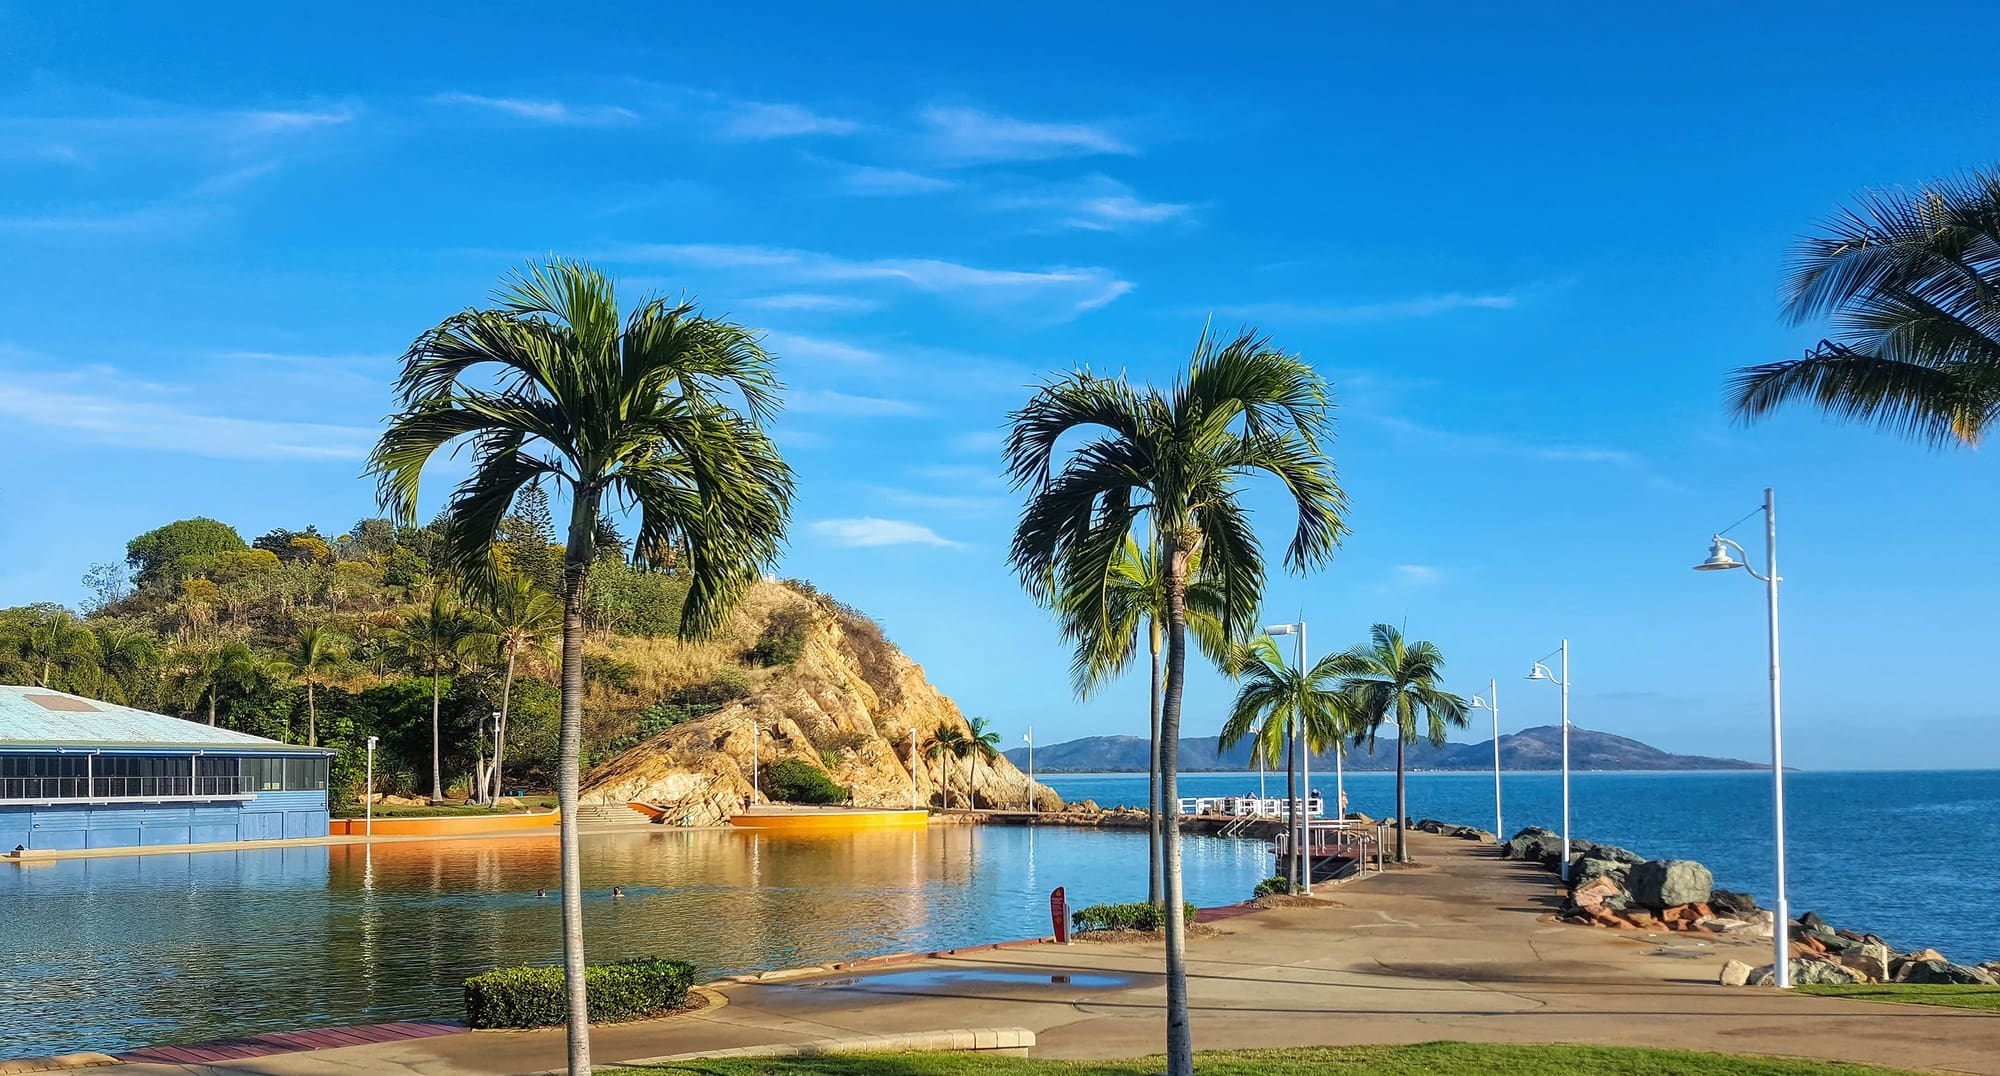 Five things to do in Townsville